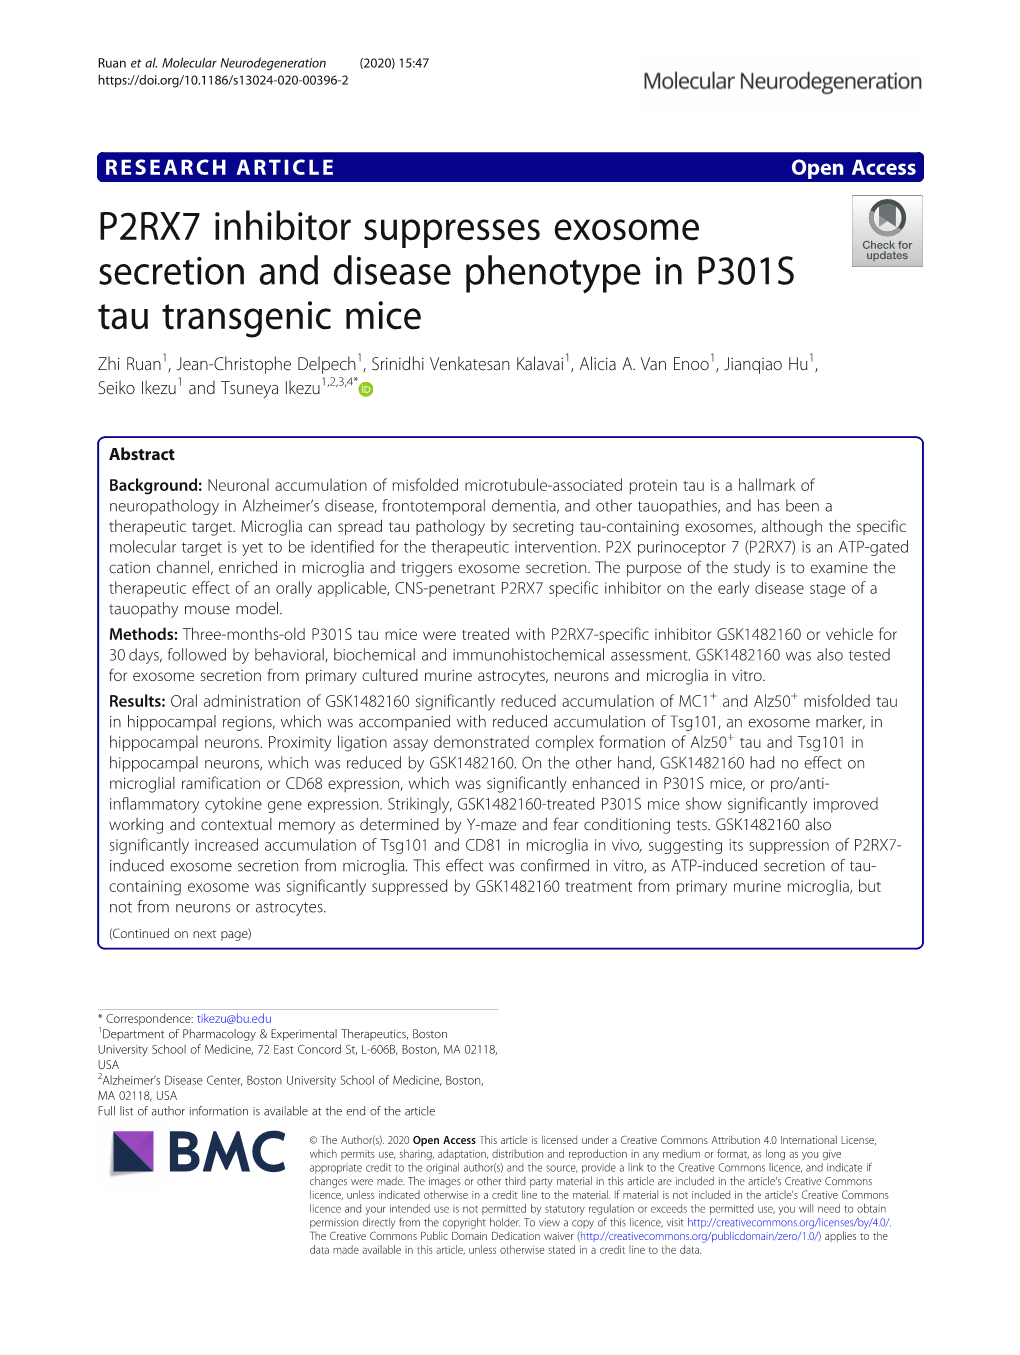 P2RX7 Inhibitor Suppresses Exosome Secretion and Disease Phenotype In